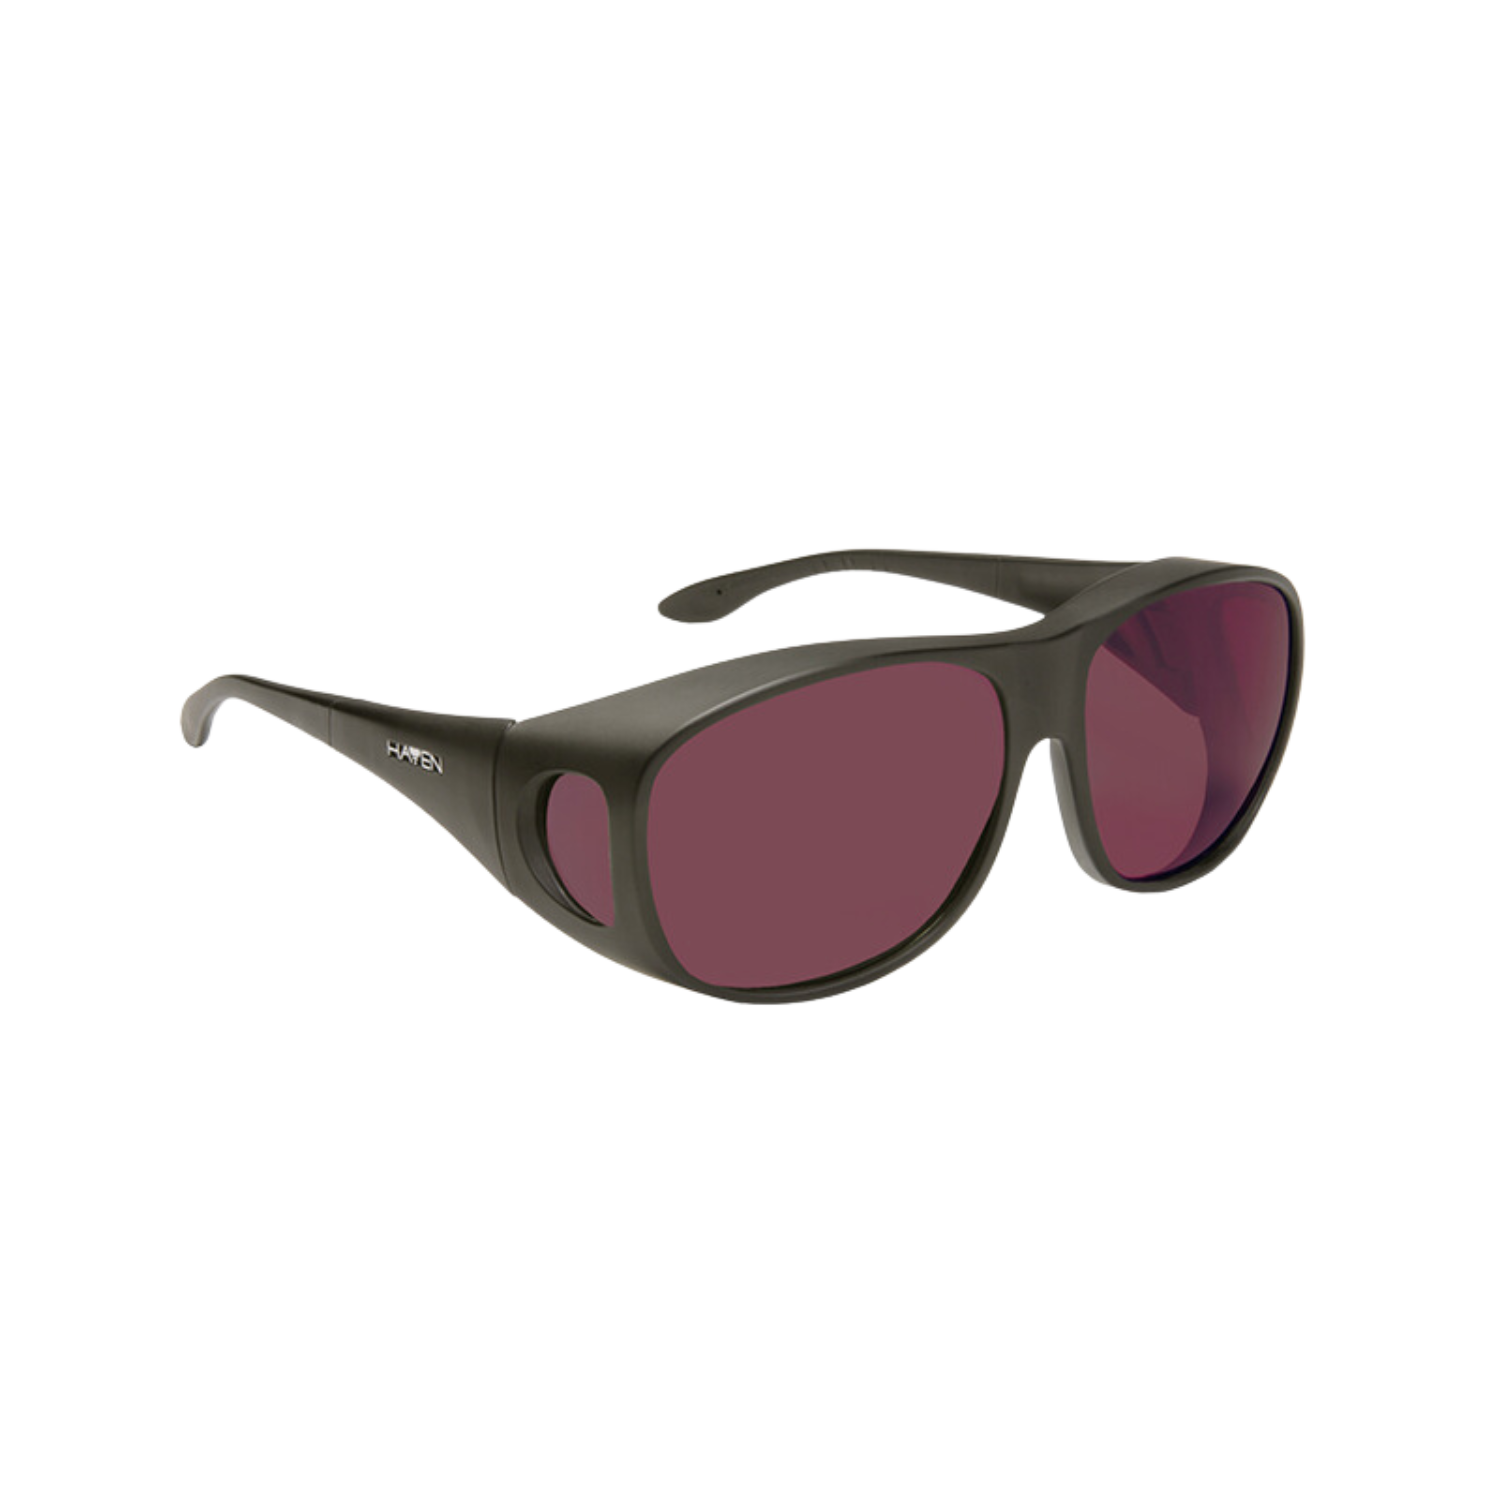 Image of the Haven Summerwood FL-41 light sensitivity sunglasses with dark rose tint from Eschenbach.